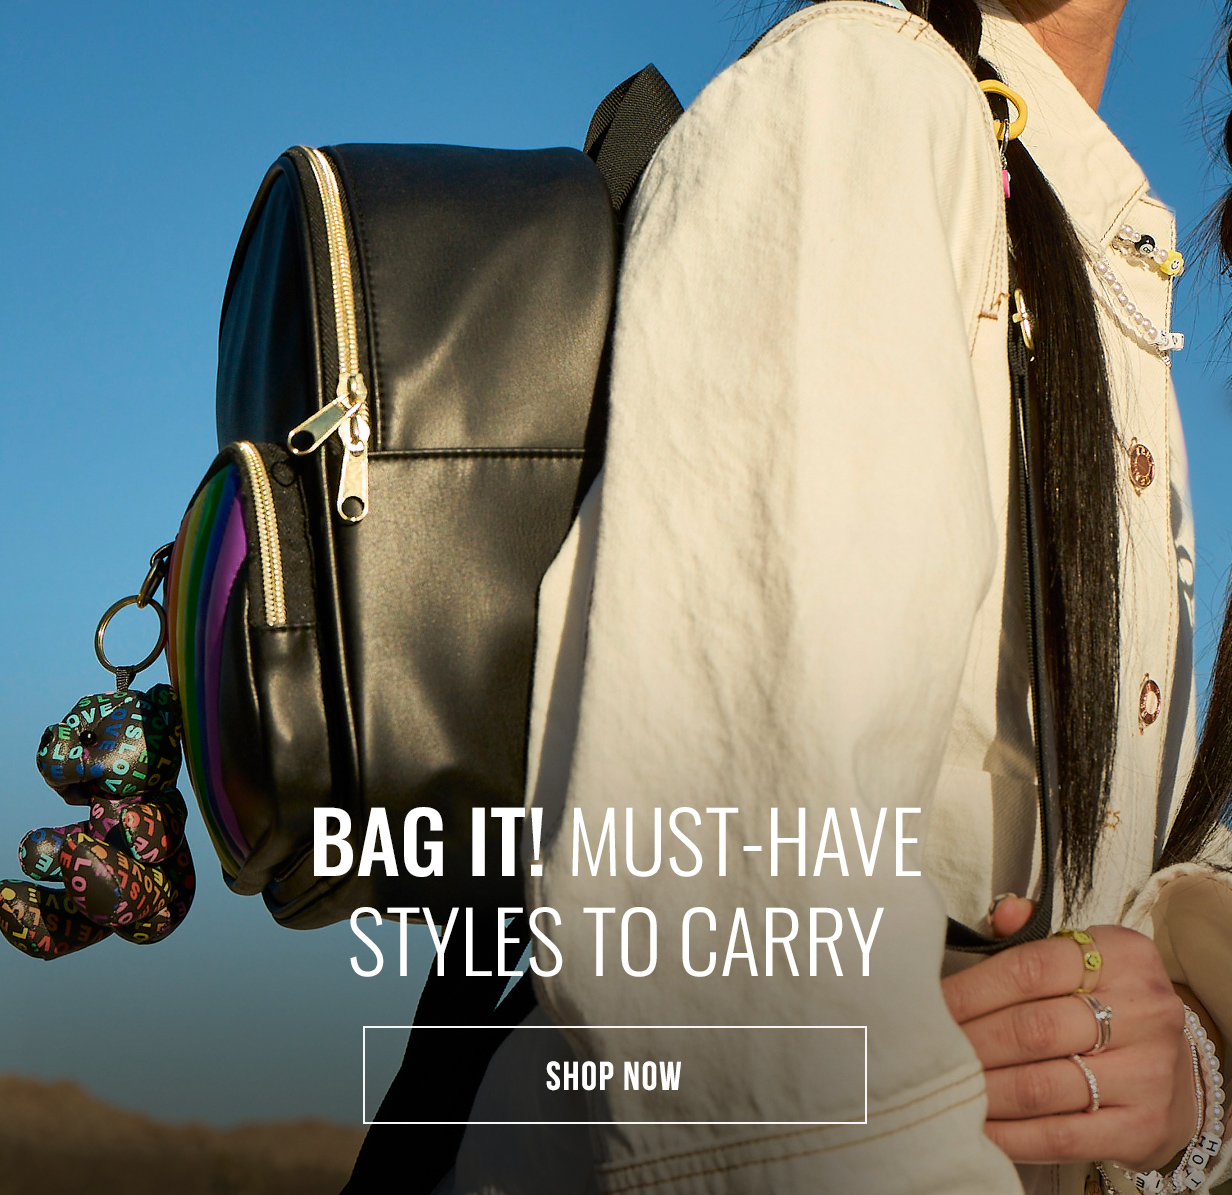 Carry On. The bags of the moment